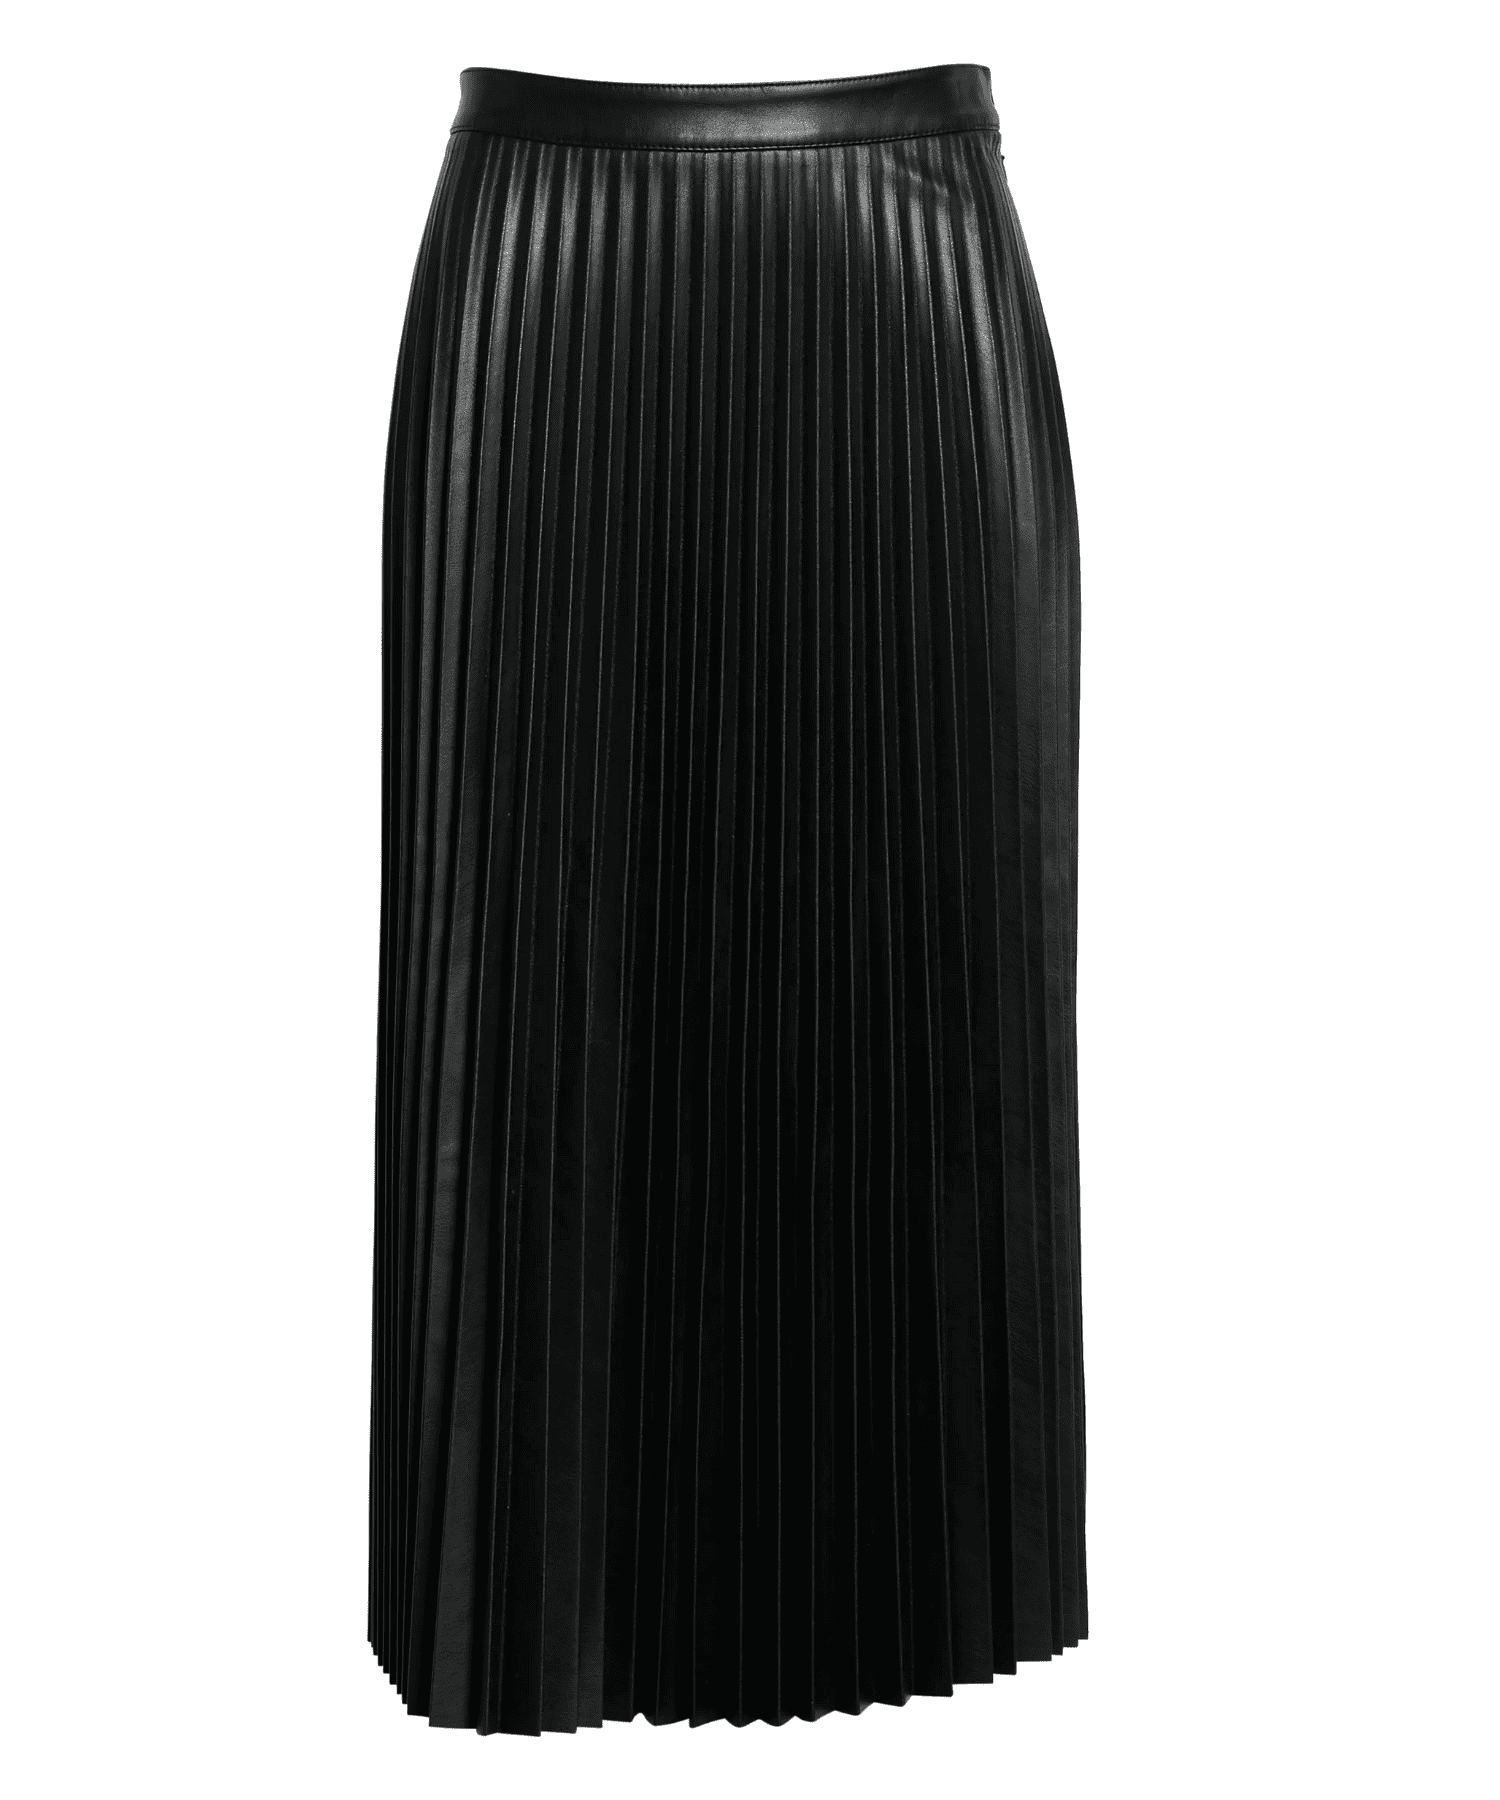 Proenza Schouler Black Faux Leather Pleated Skirt